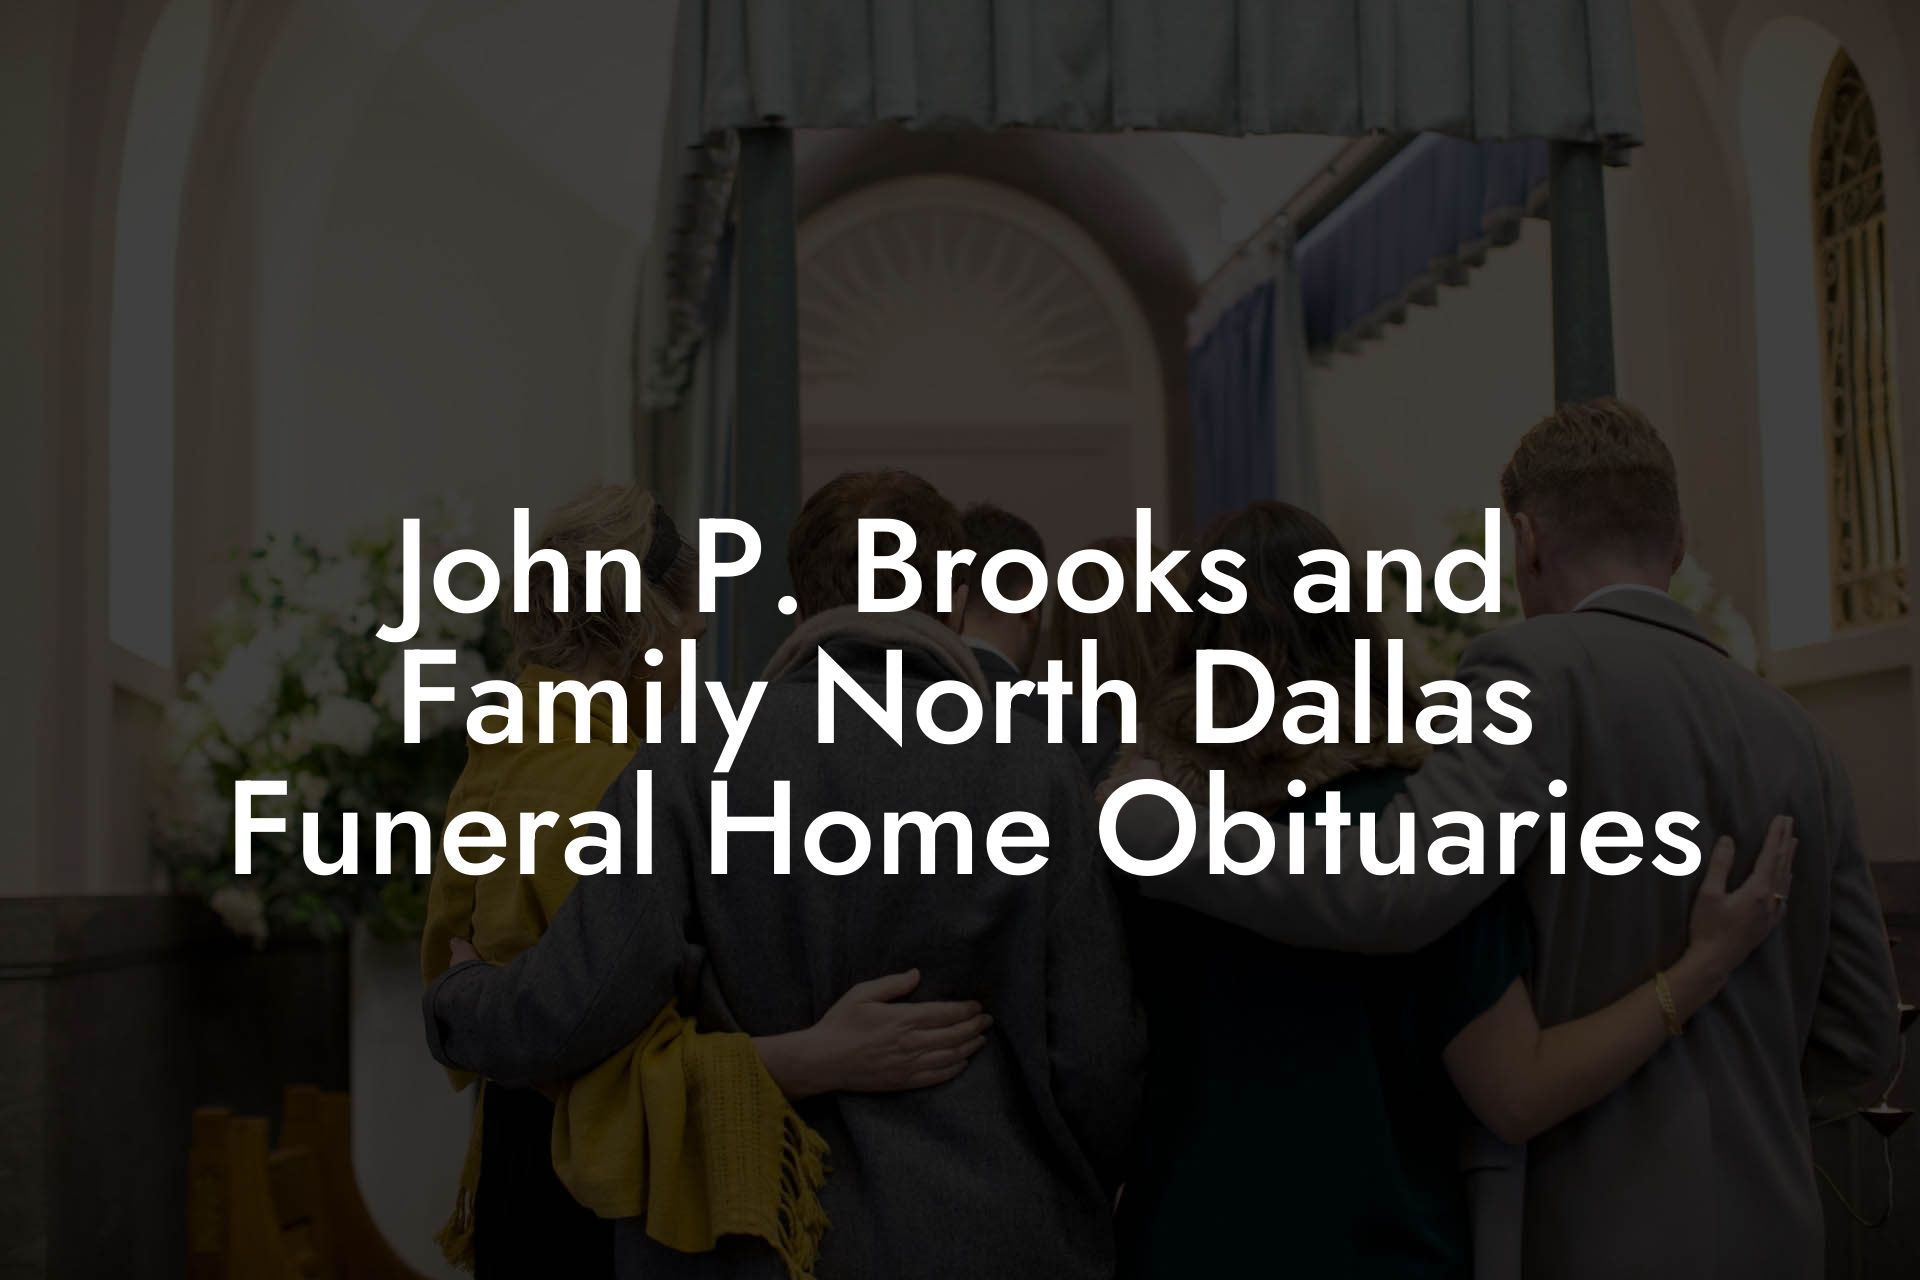 John P. Brooks and Family North Dallas Funeral Home Obituaries